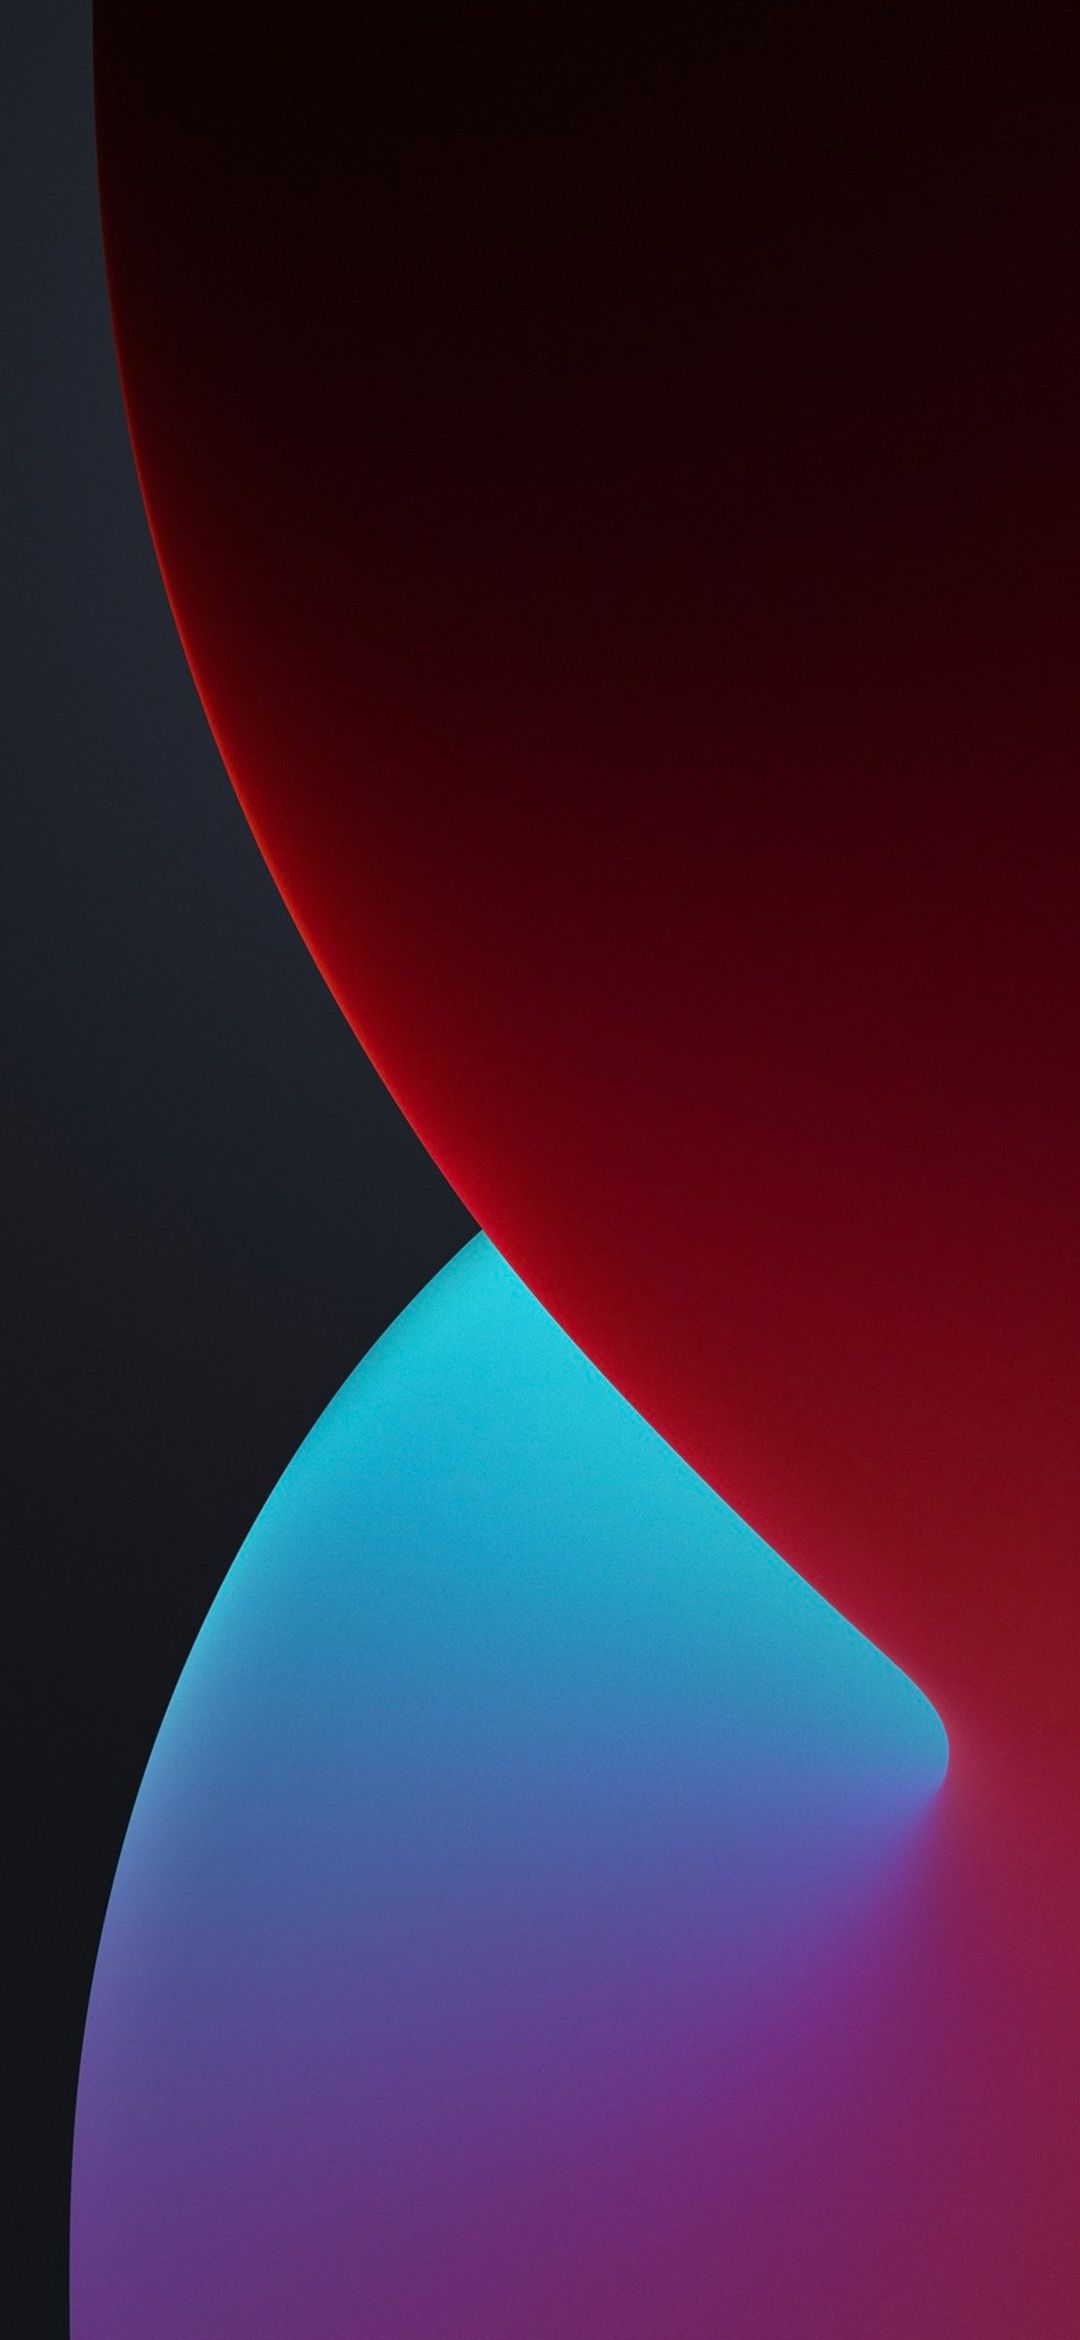 Basic Iphone Wallpapers